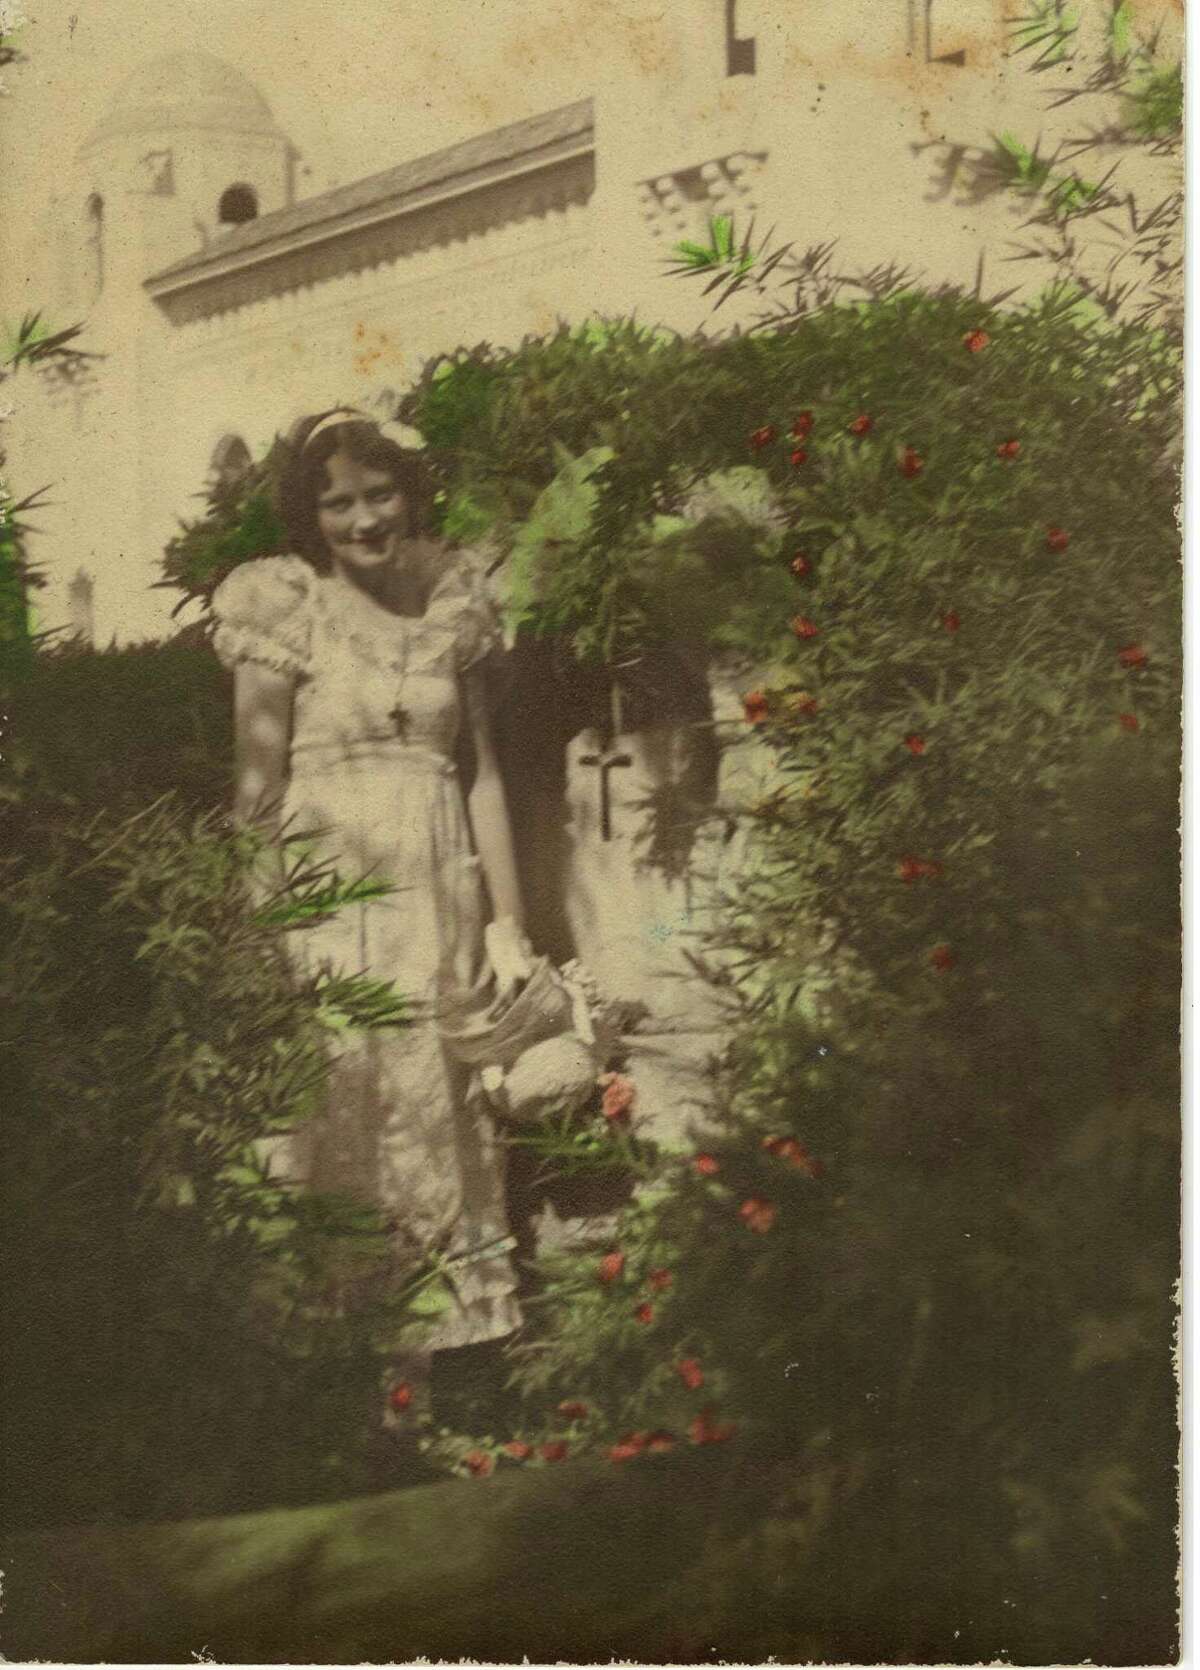 Aline B. Carter in her backyard with the Municipal Auditorium in the background in the early 1930s.